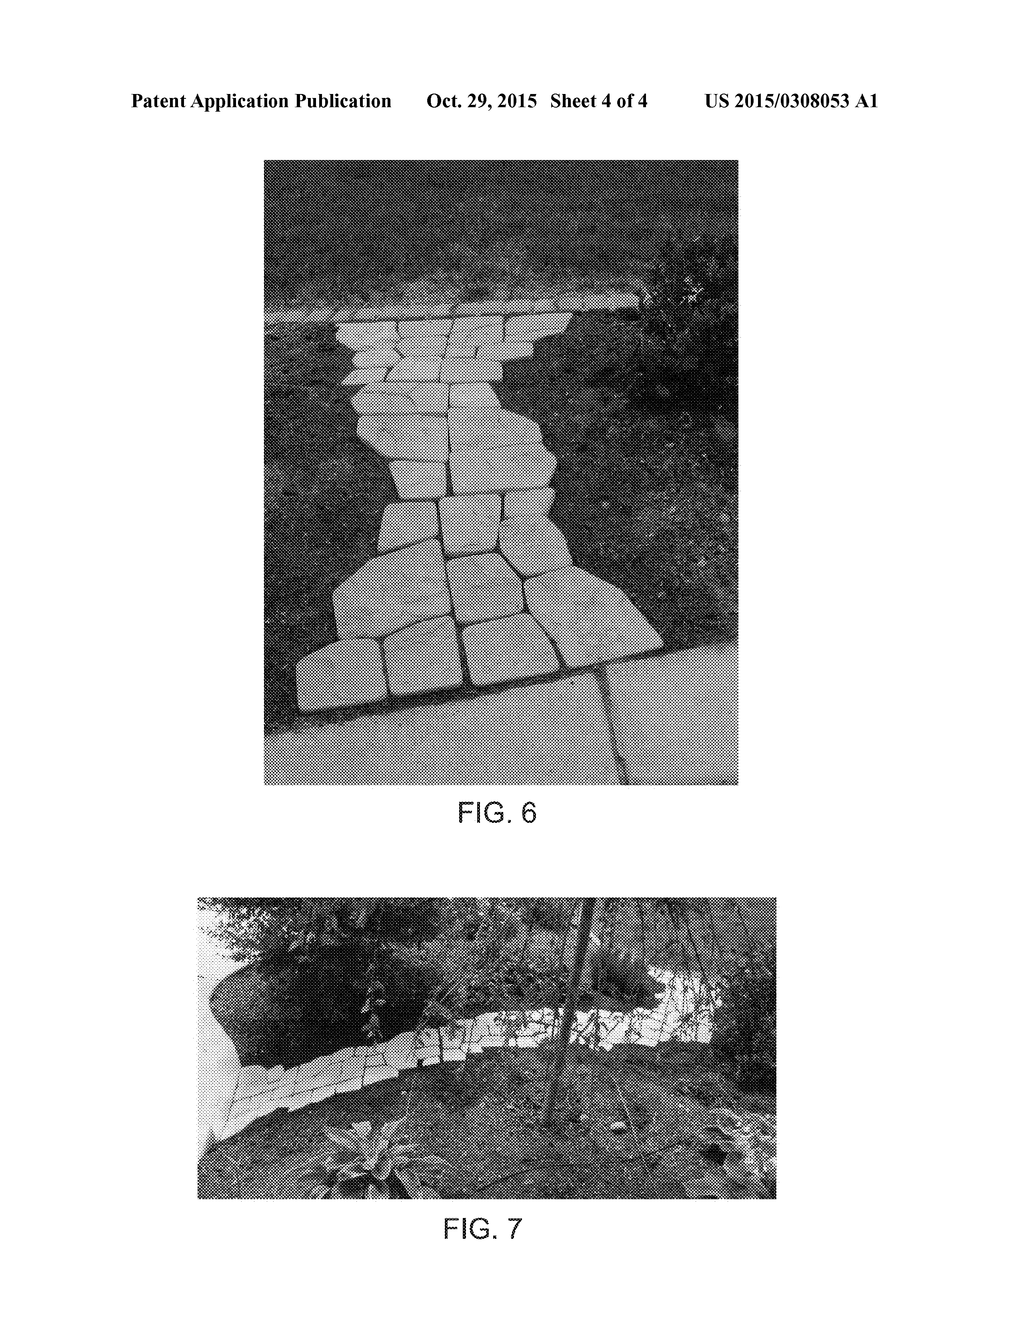 Modular Decorative Landscape Product and Associated Methods - diagram, schematic, and image 05